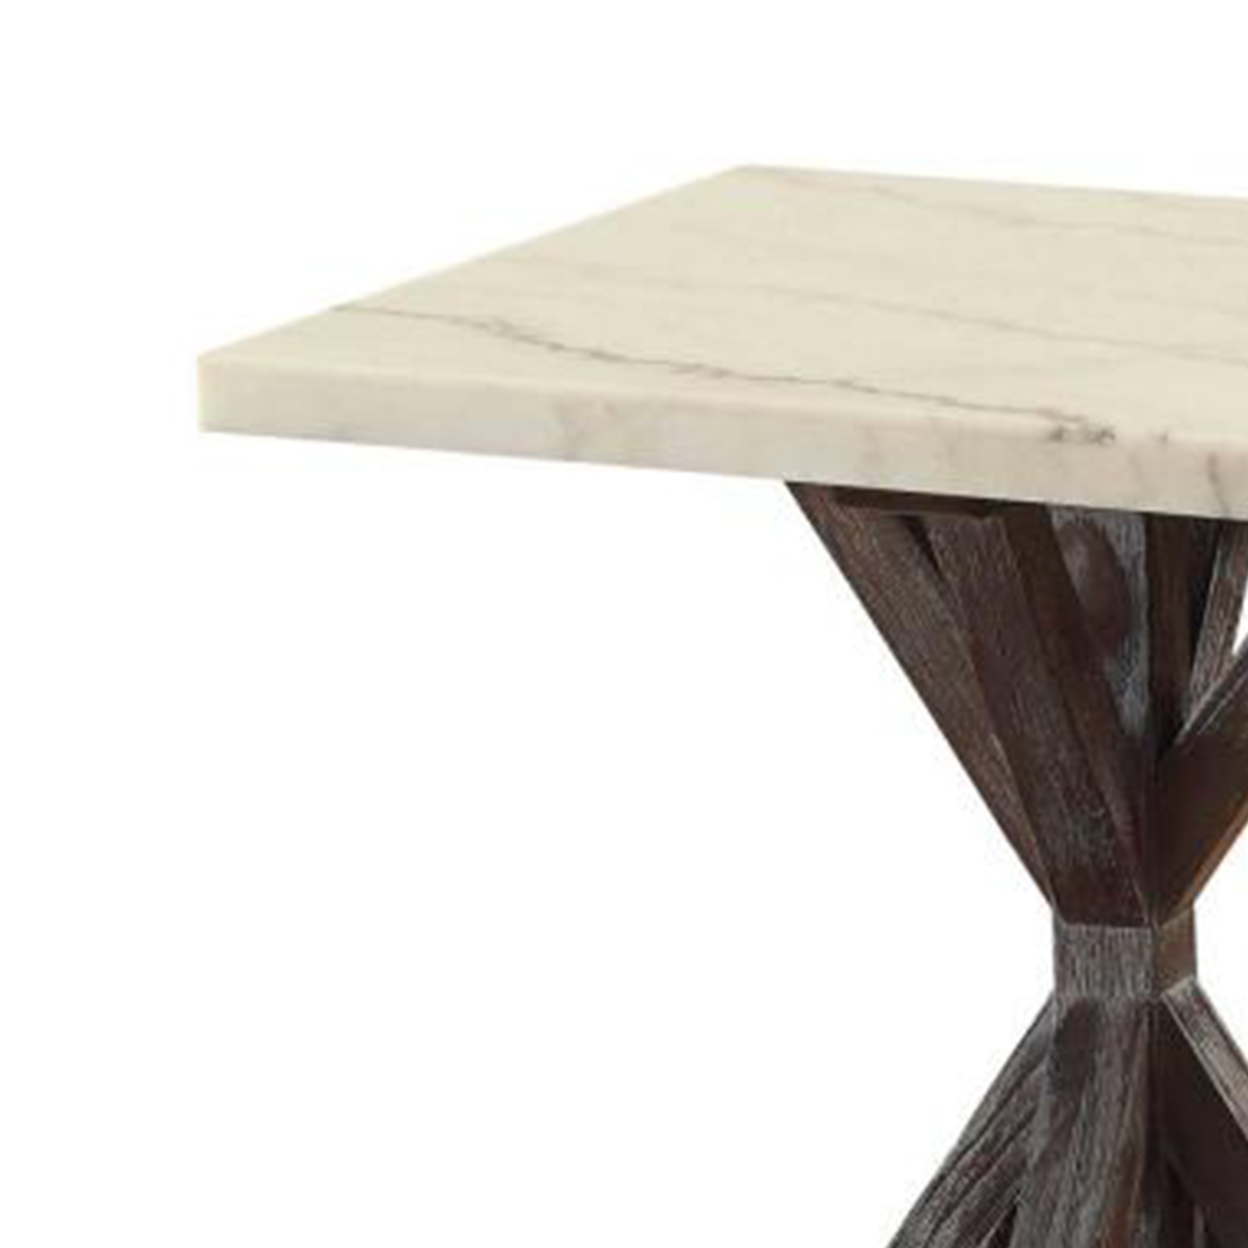 Marble Top End Table With Wooden Tri Pod Base, White And Espresso Brown- Saltoro Sherpi